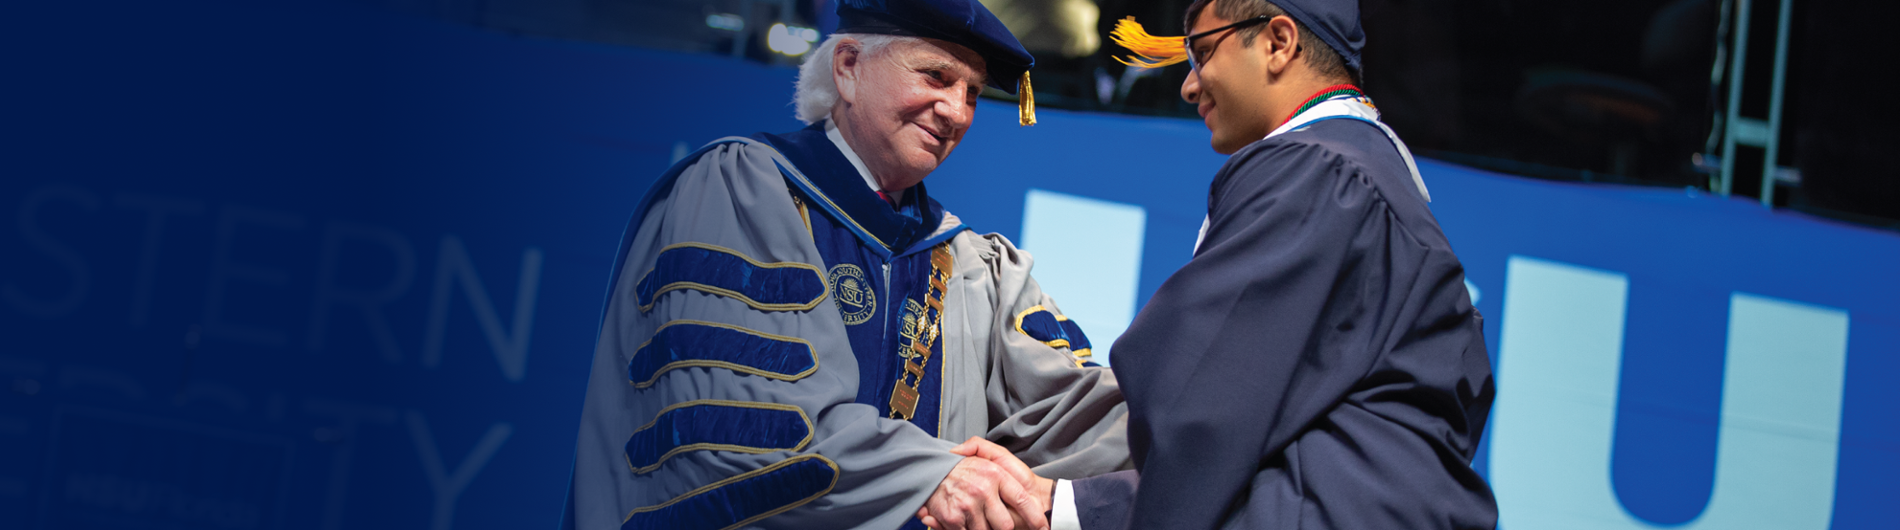 President Hanbury shaking a graduate's hand on stage.